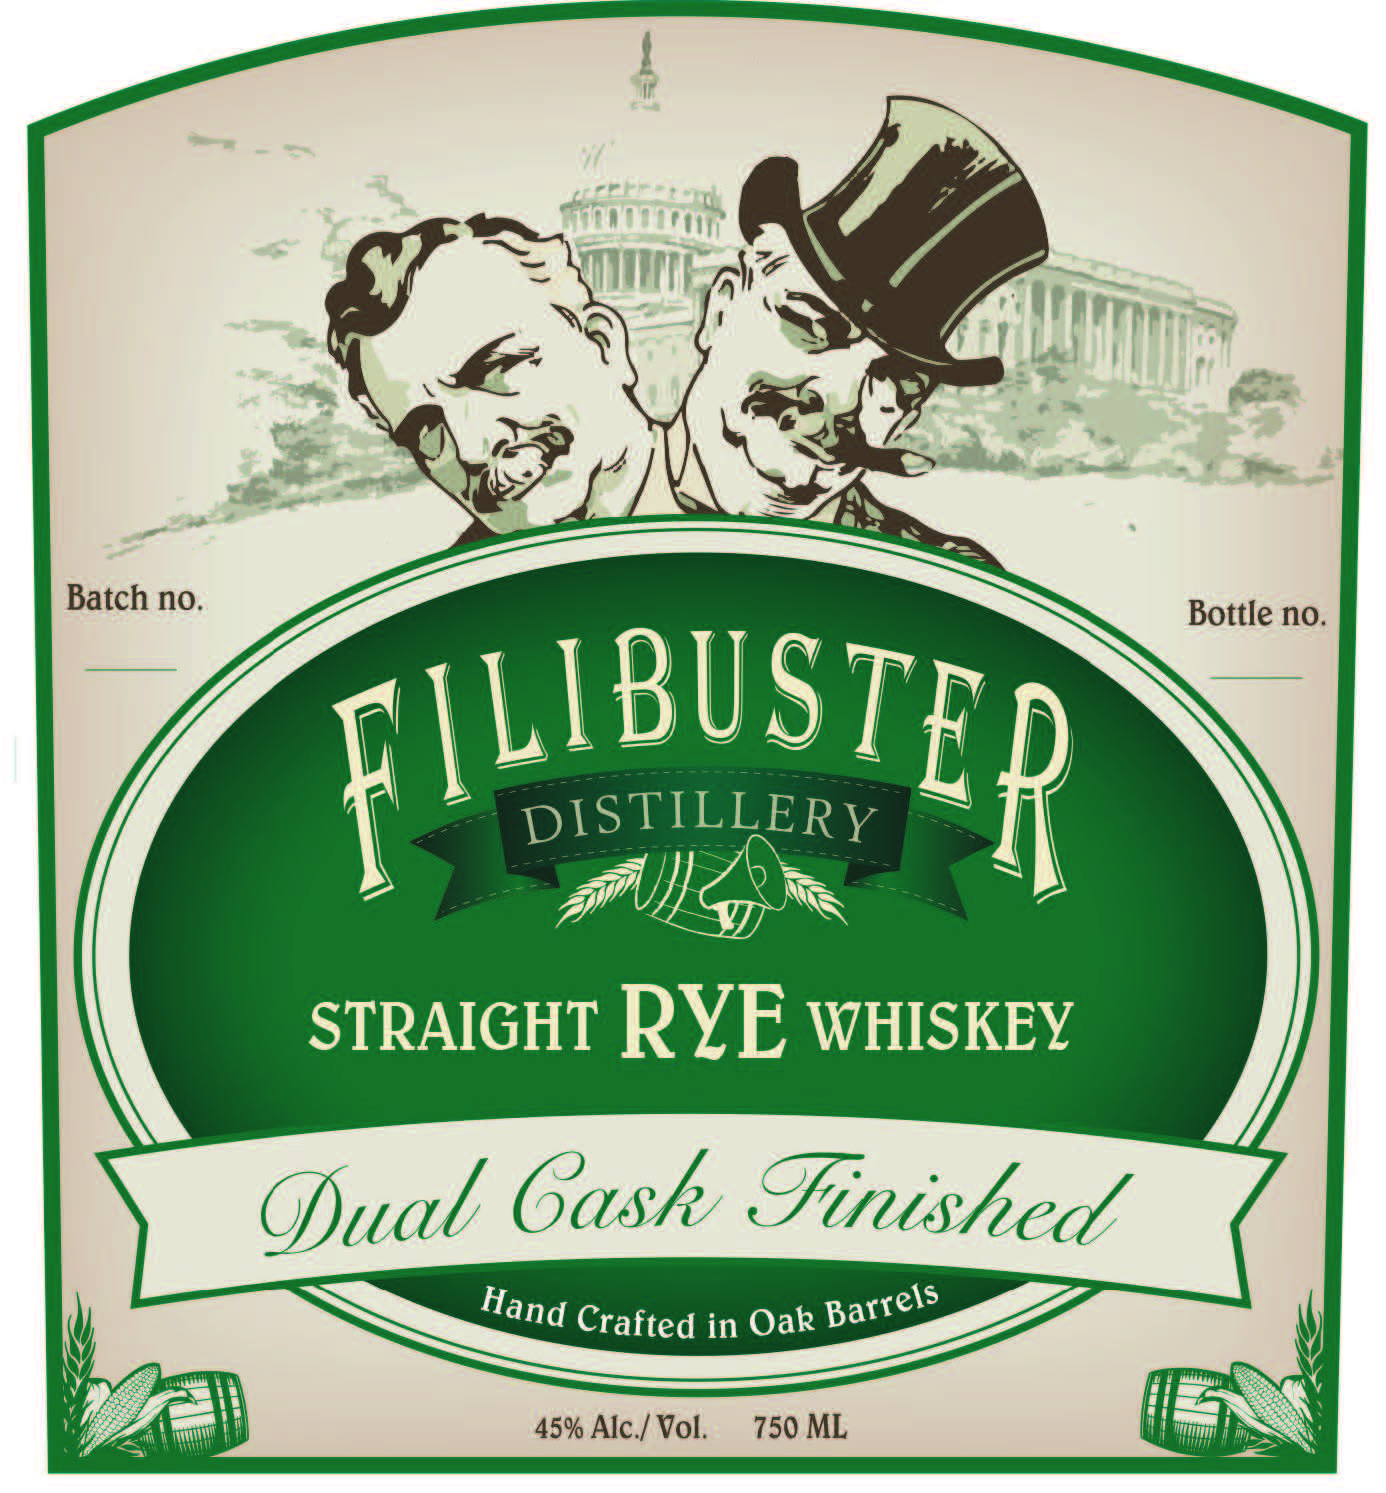 Filibuster - Straight Rye Whiskey - Dual Cask Finished label